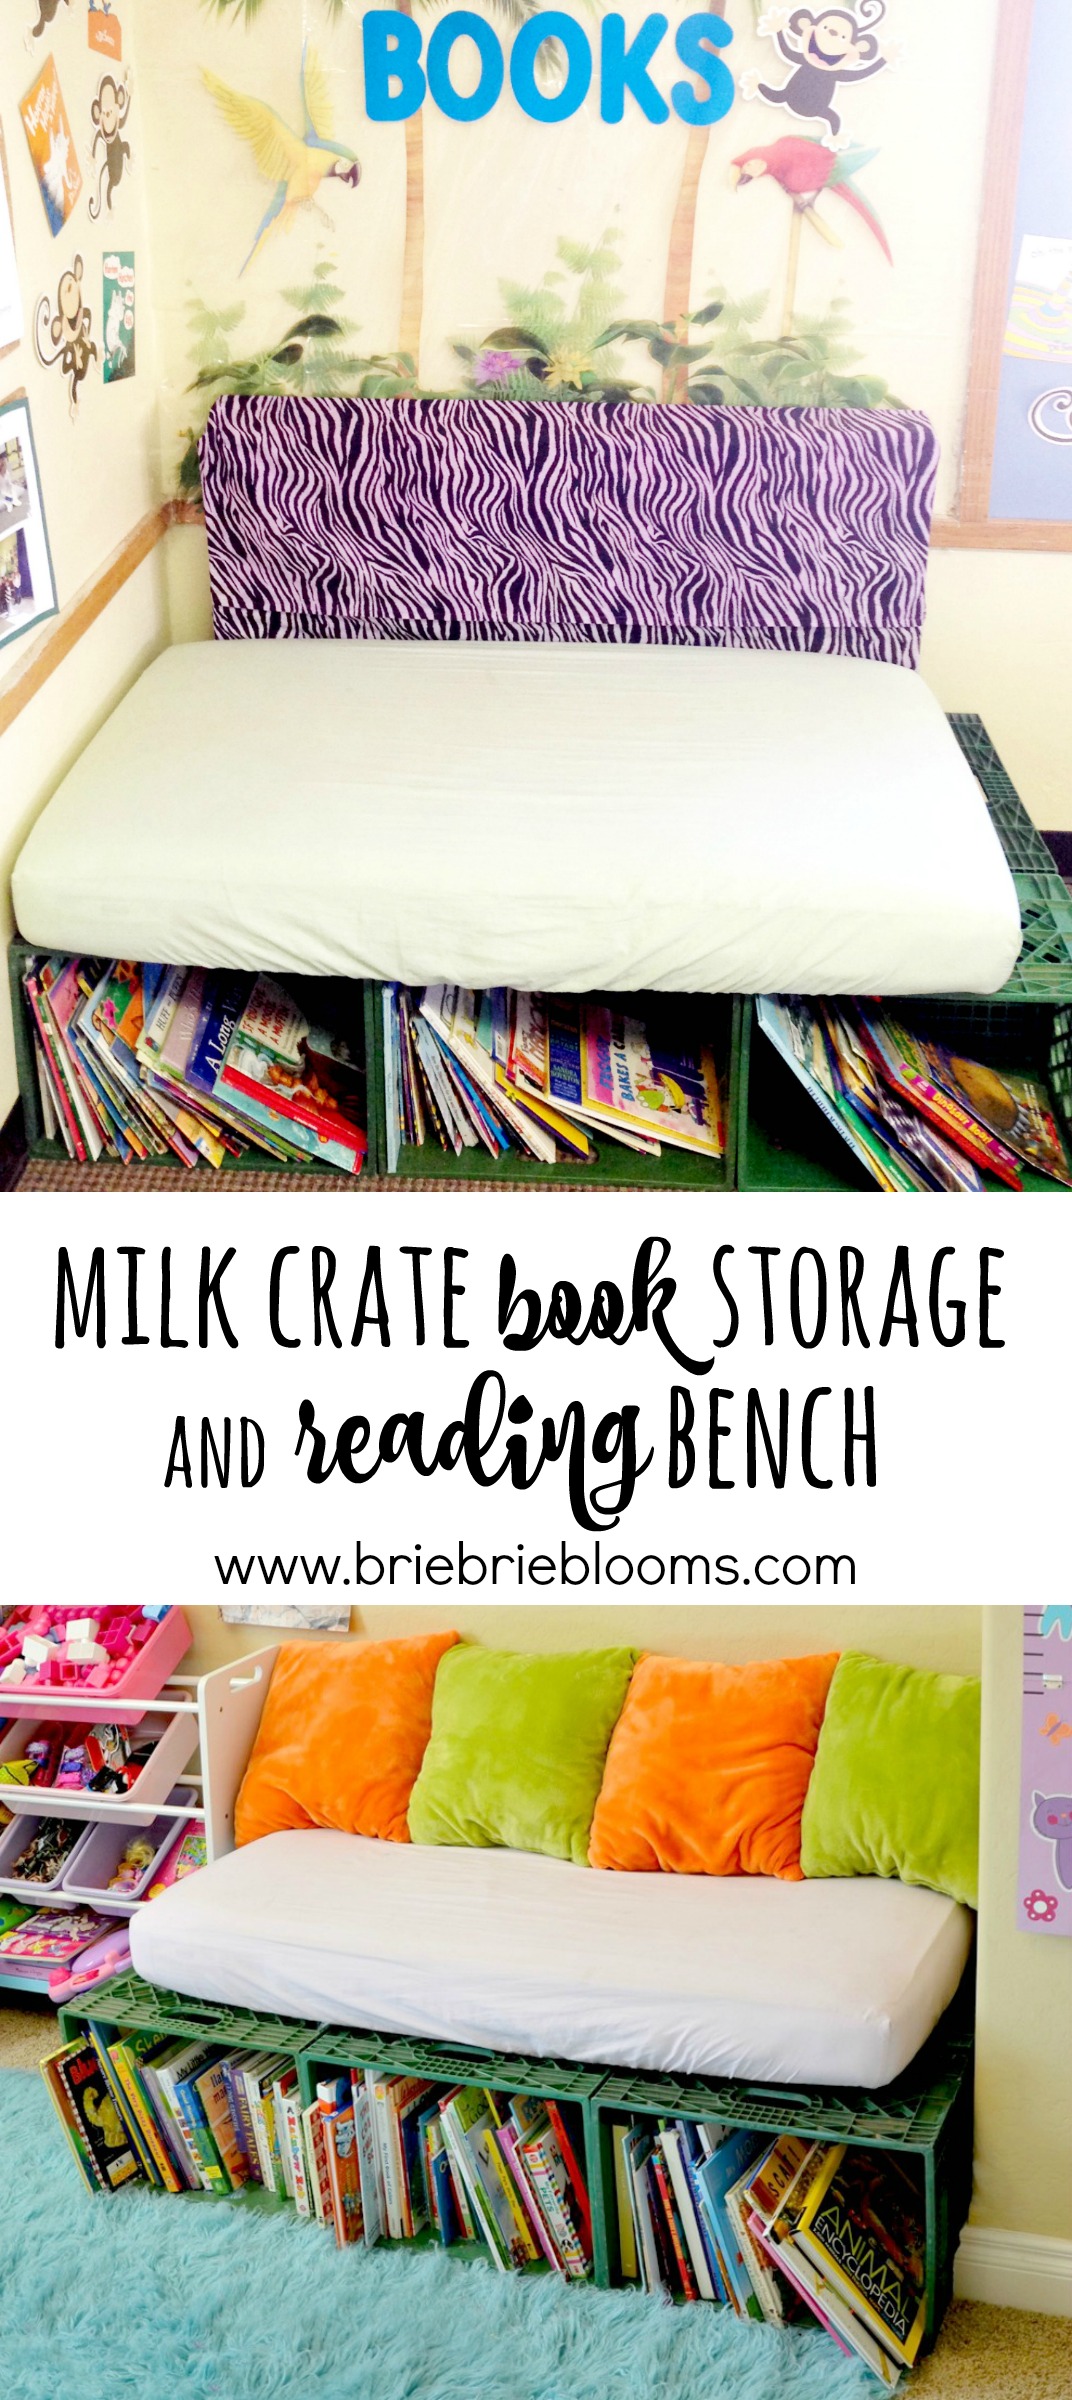 milk crate book storage and reading bench